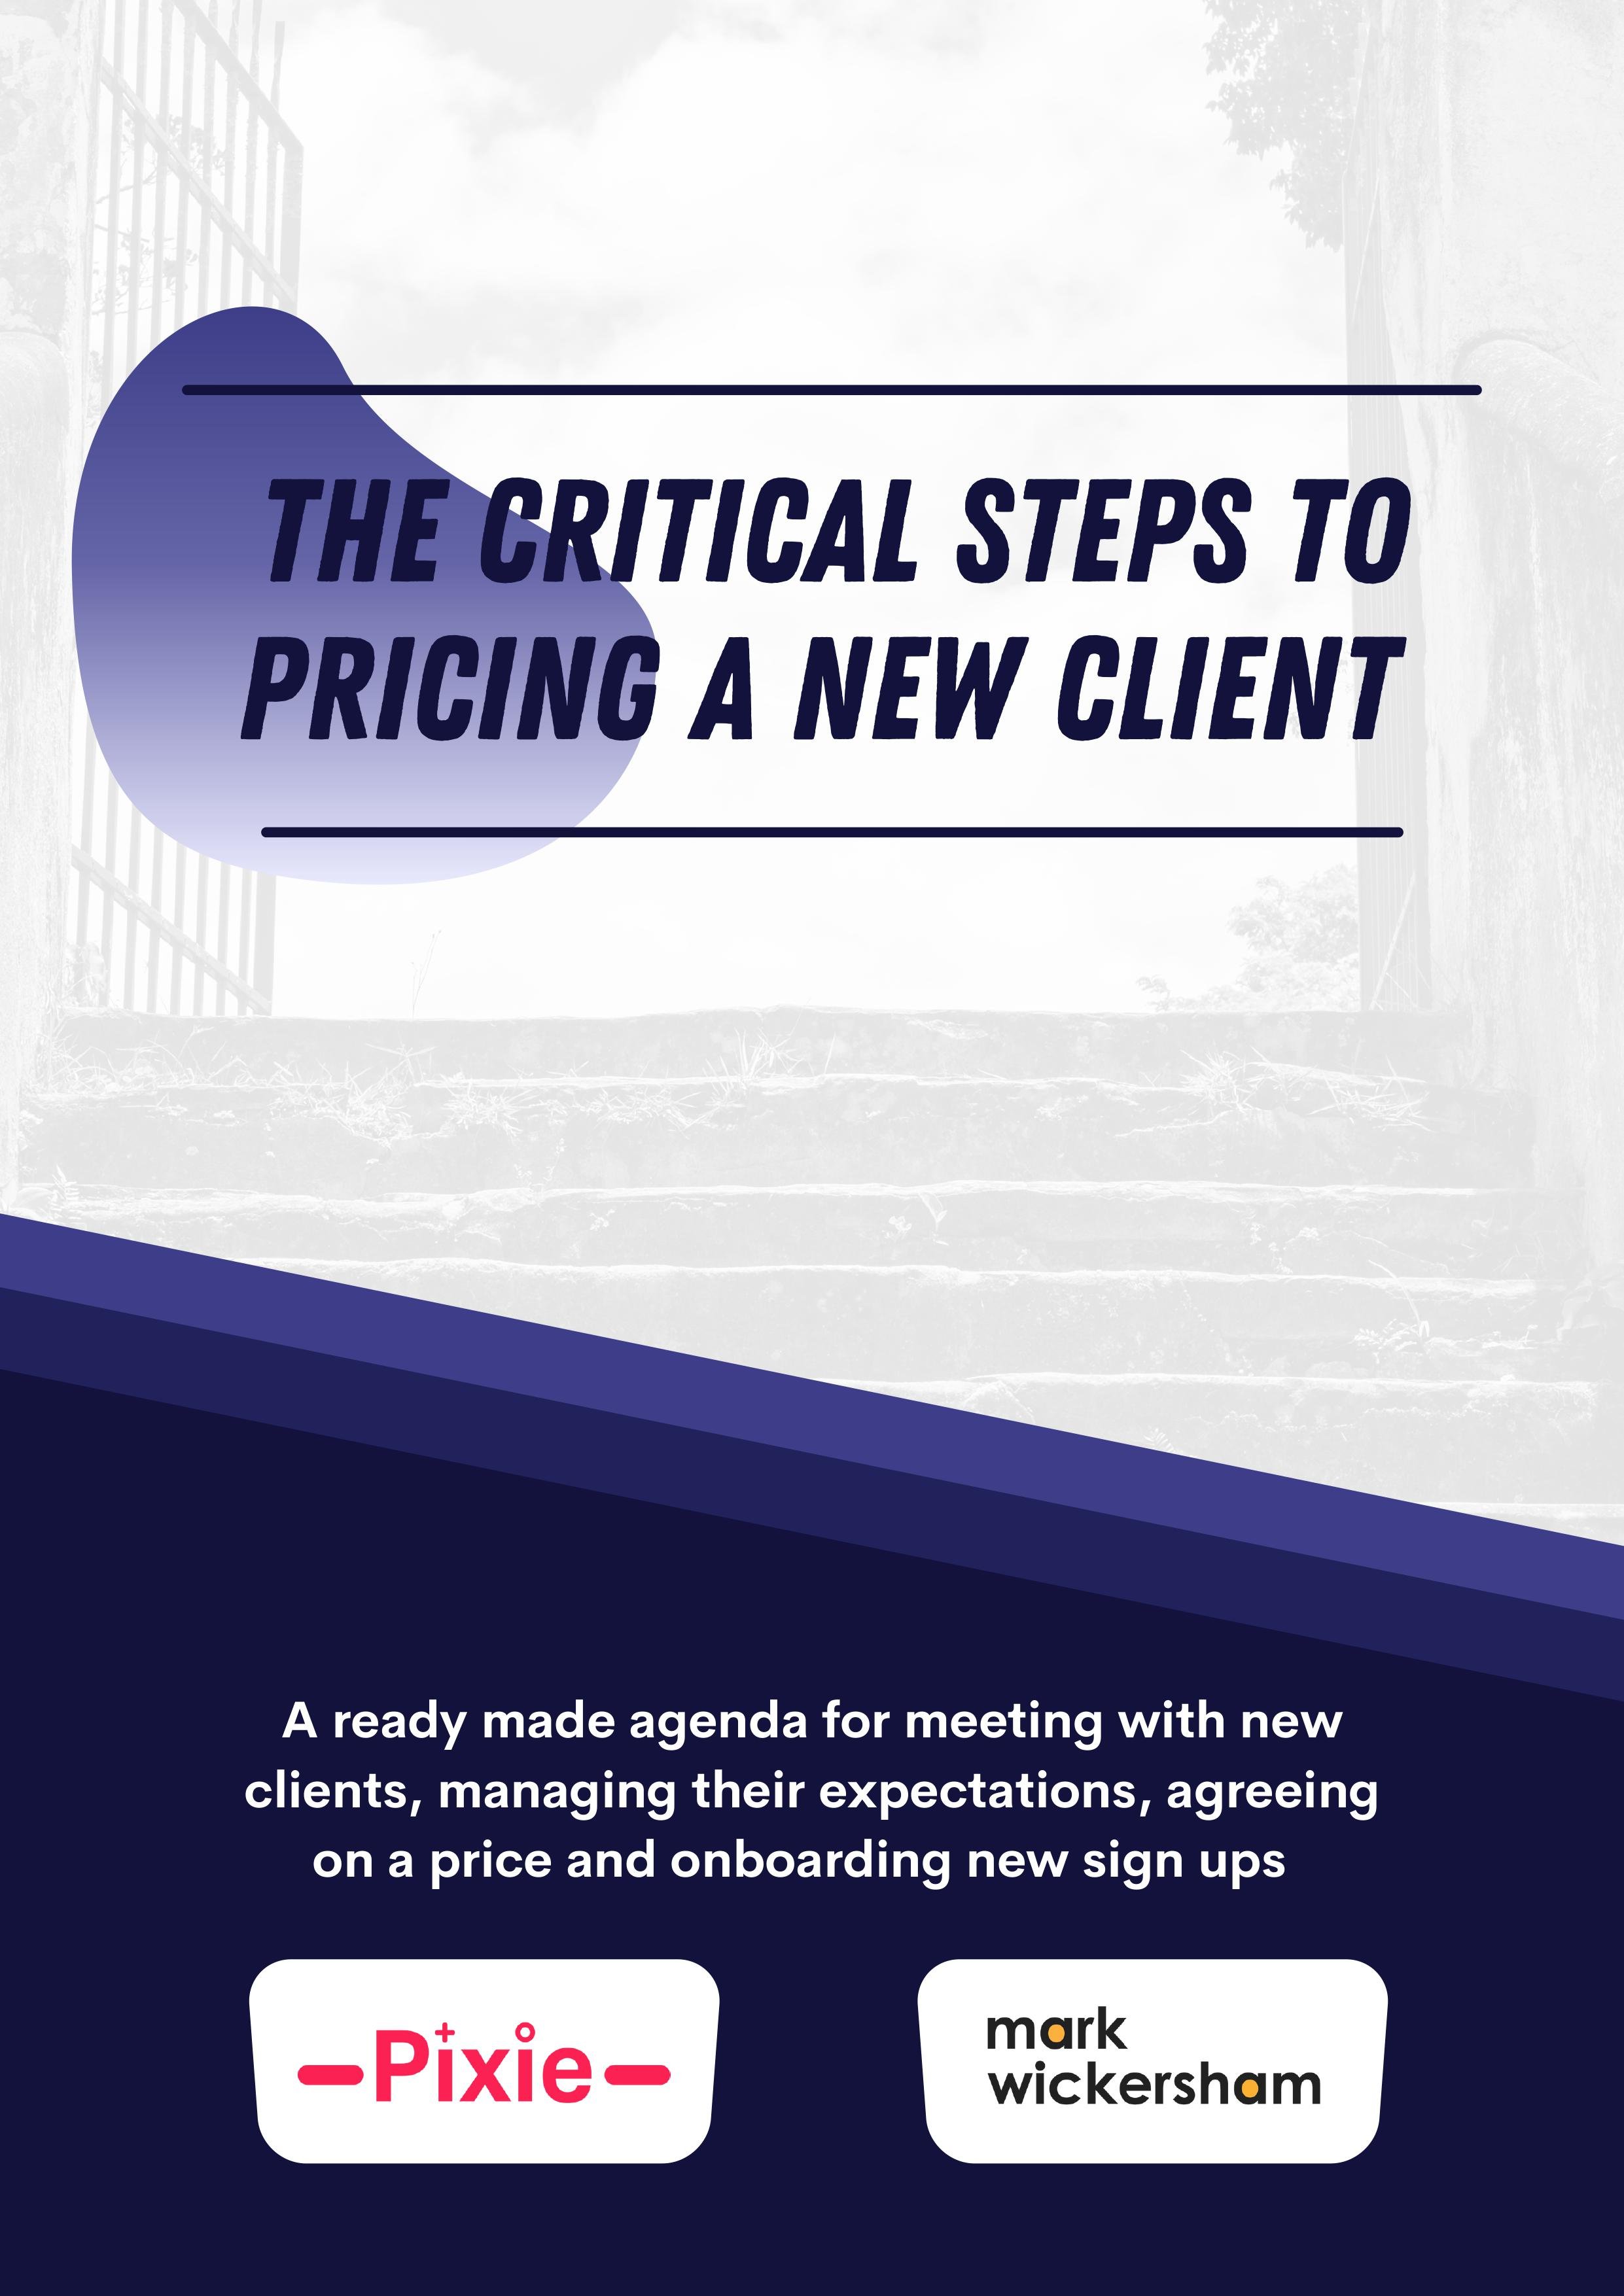 Discover the 7 critical steps to pricing a new client